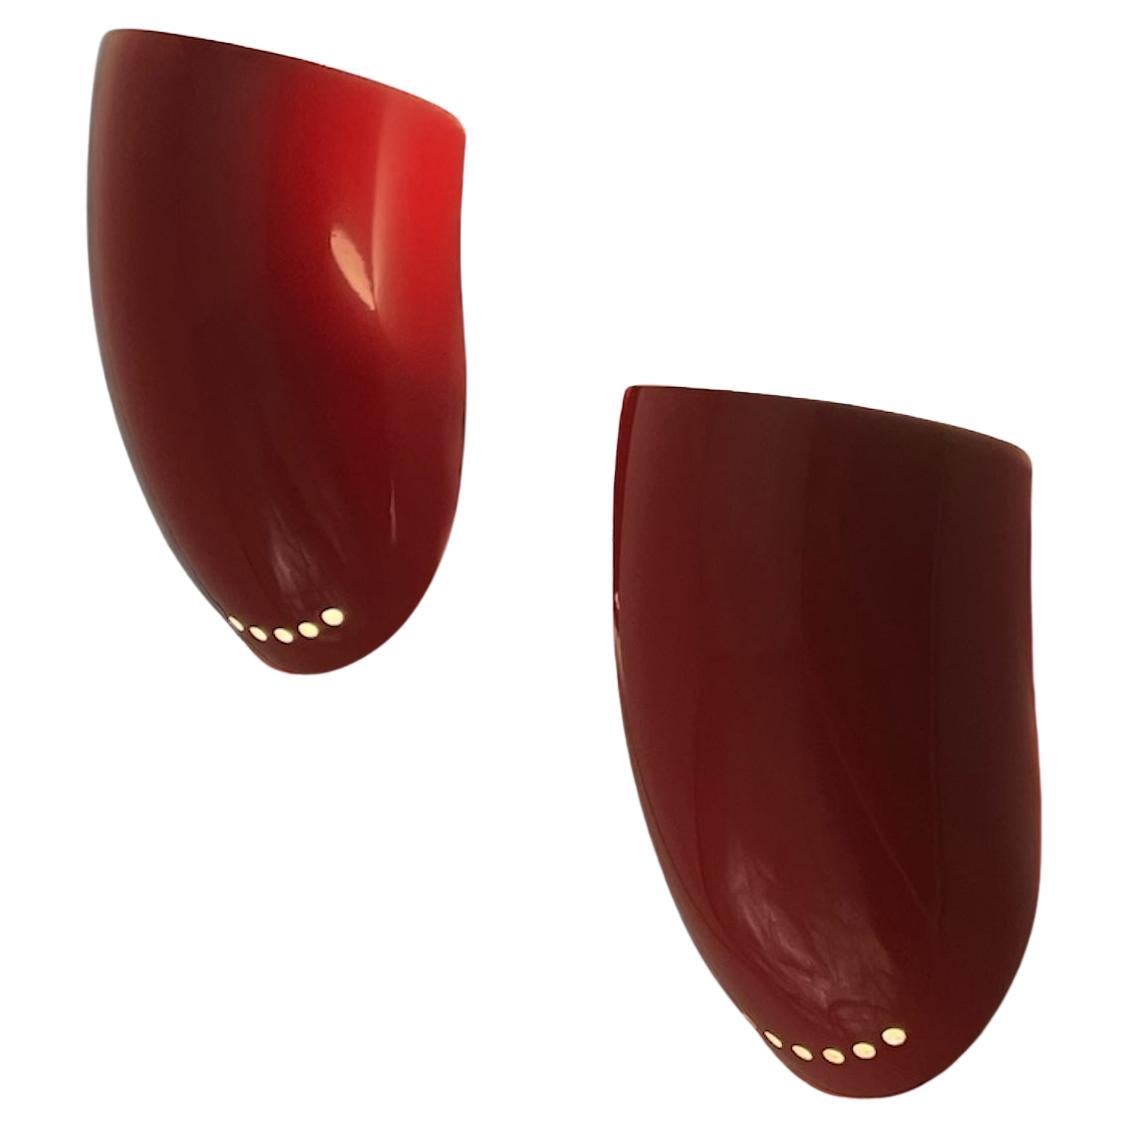 Gomito Wall Lamps by Elio Martinelli for Martinelli Luce in Red, 1970s, Set of 2